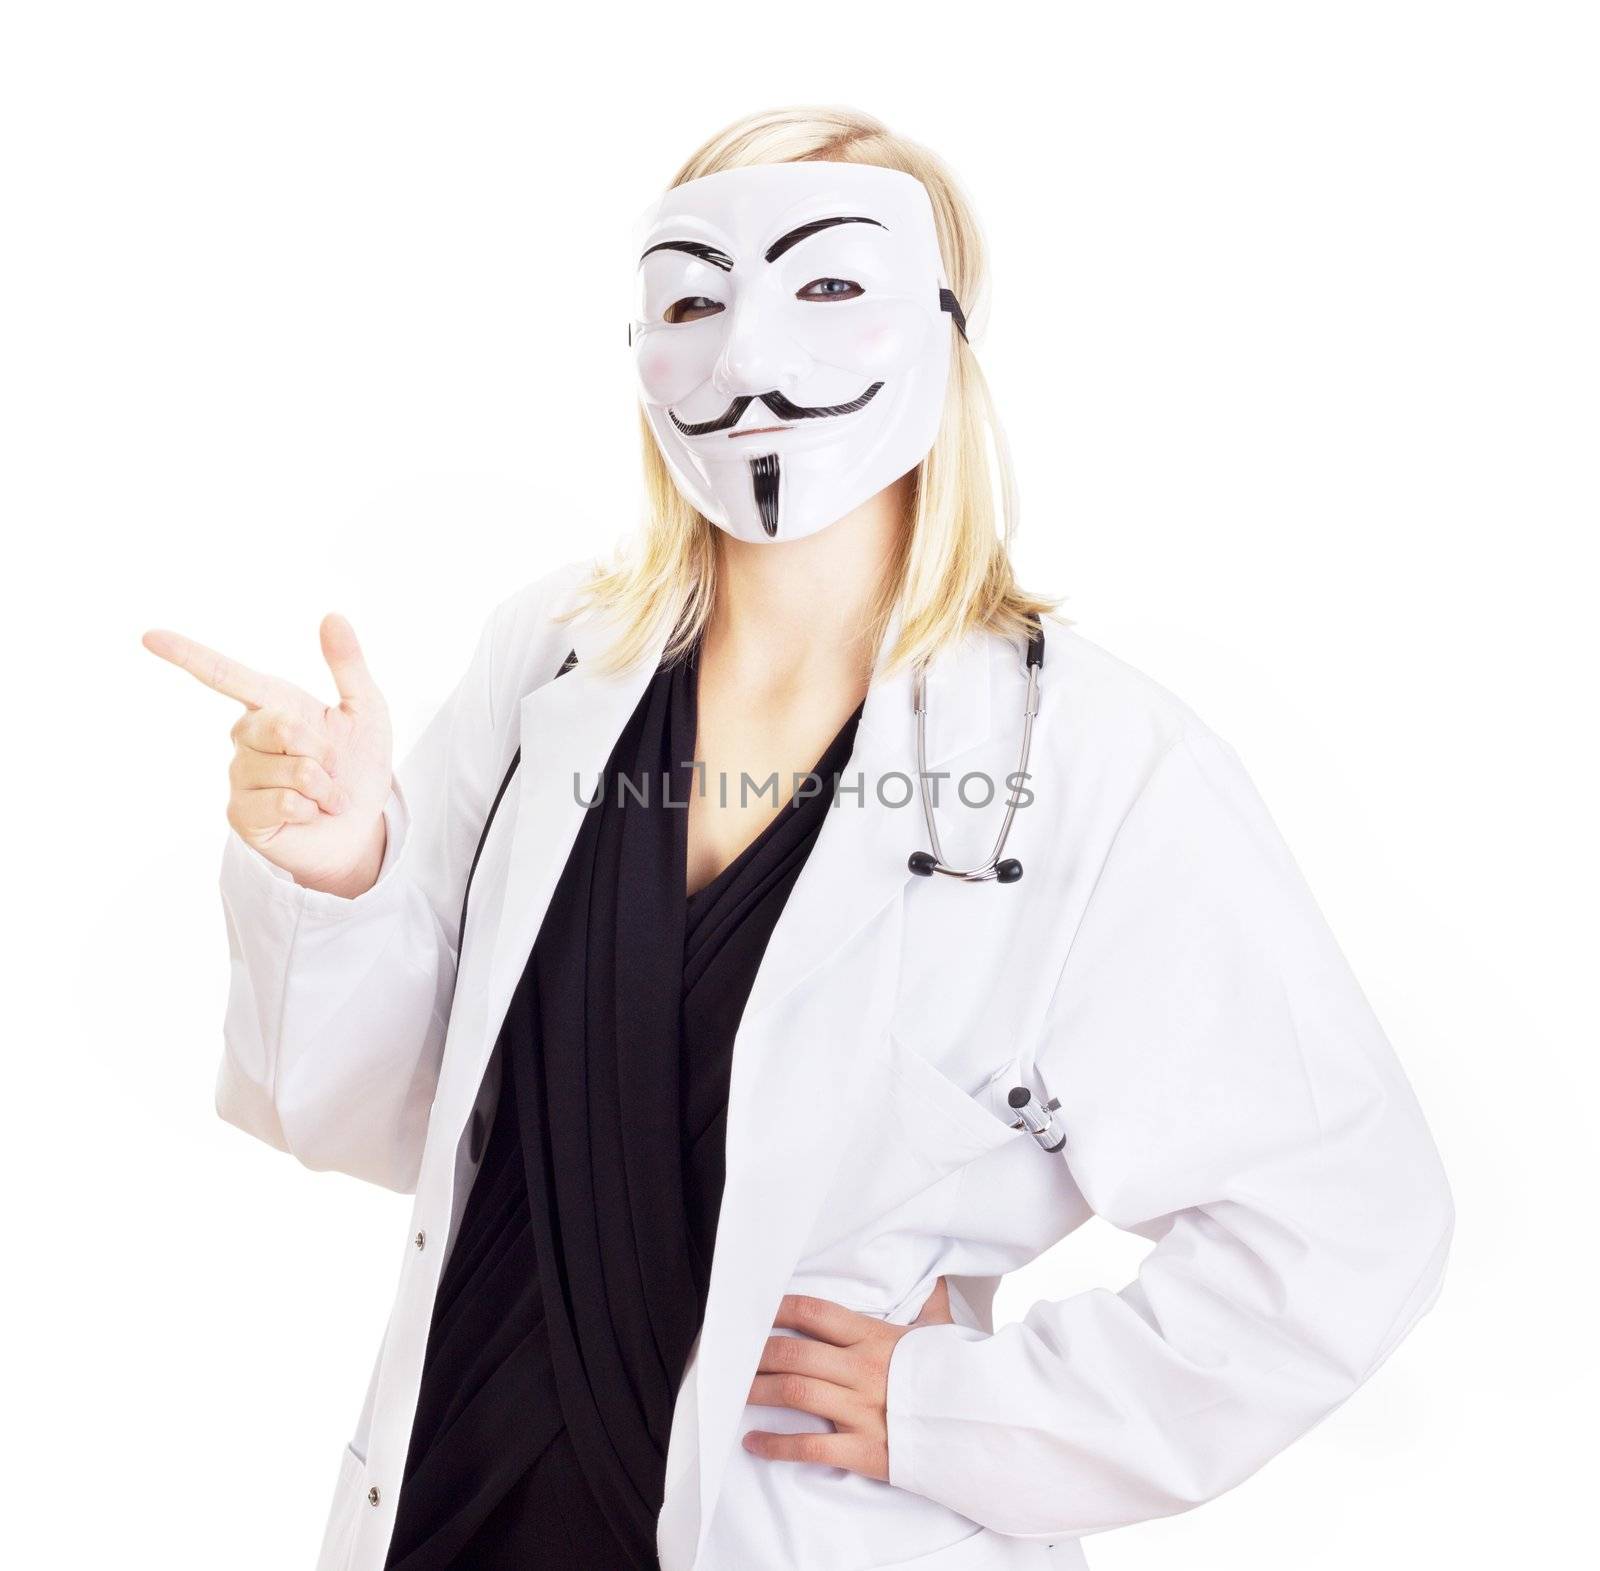 Medical doctor with a guy fawkes mask by gwolters